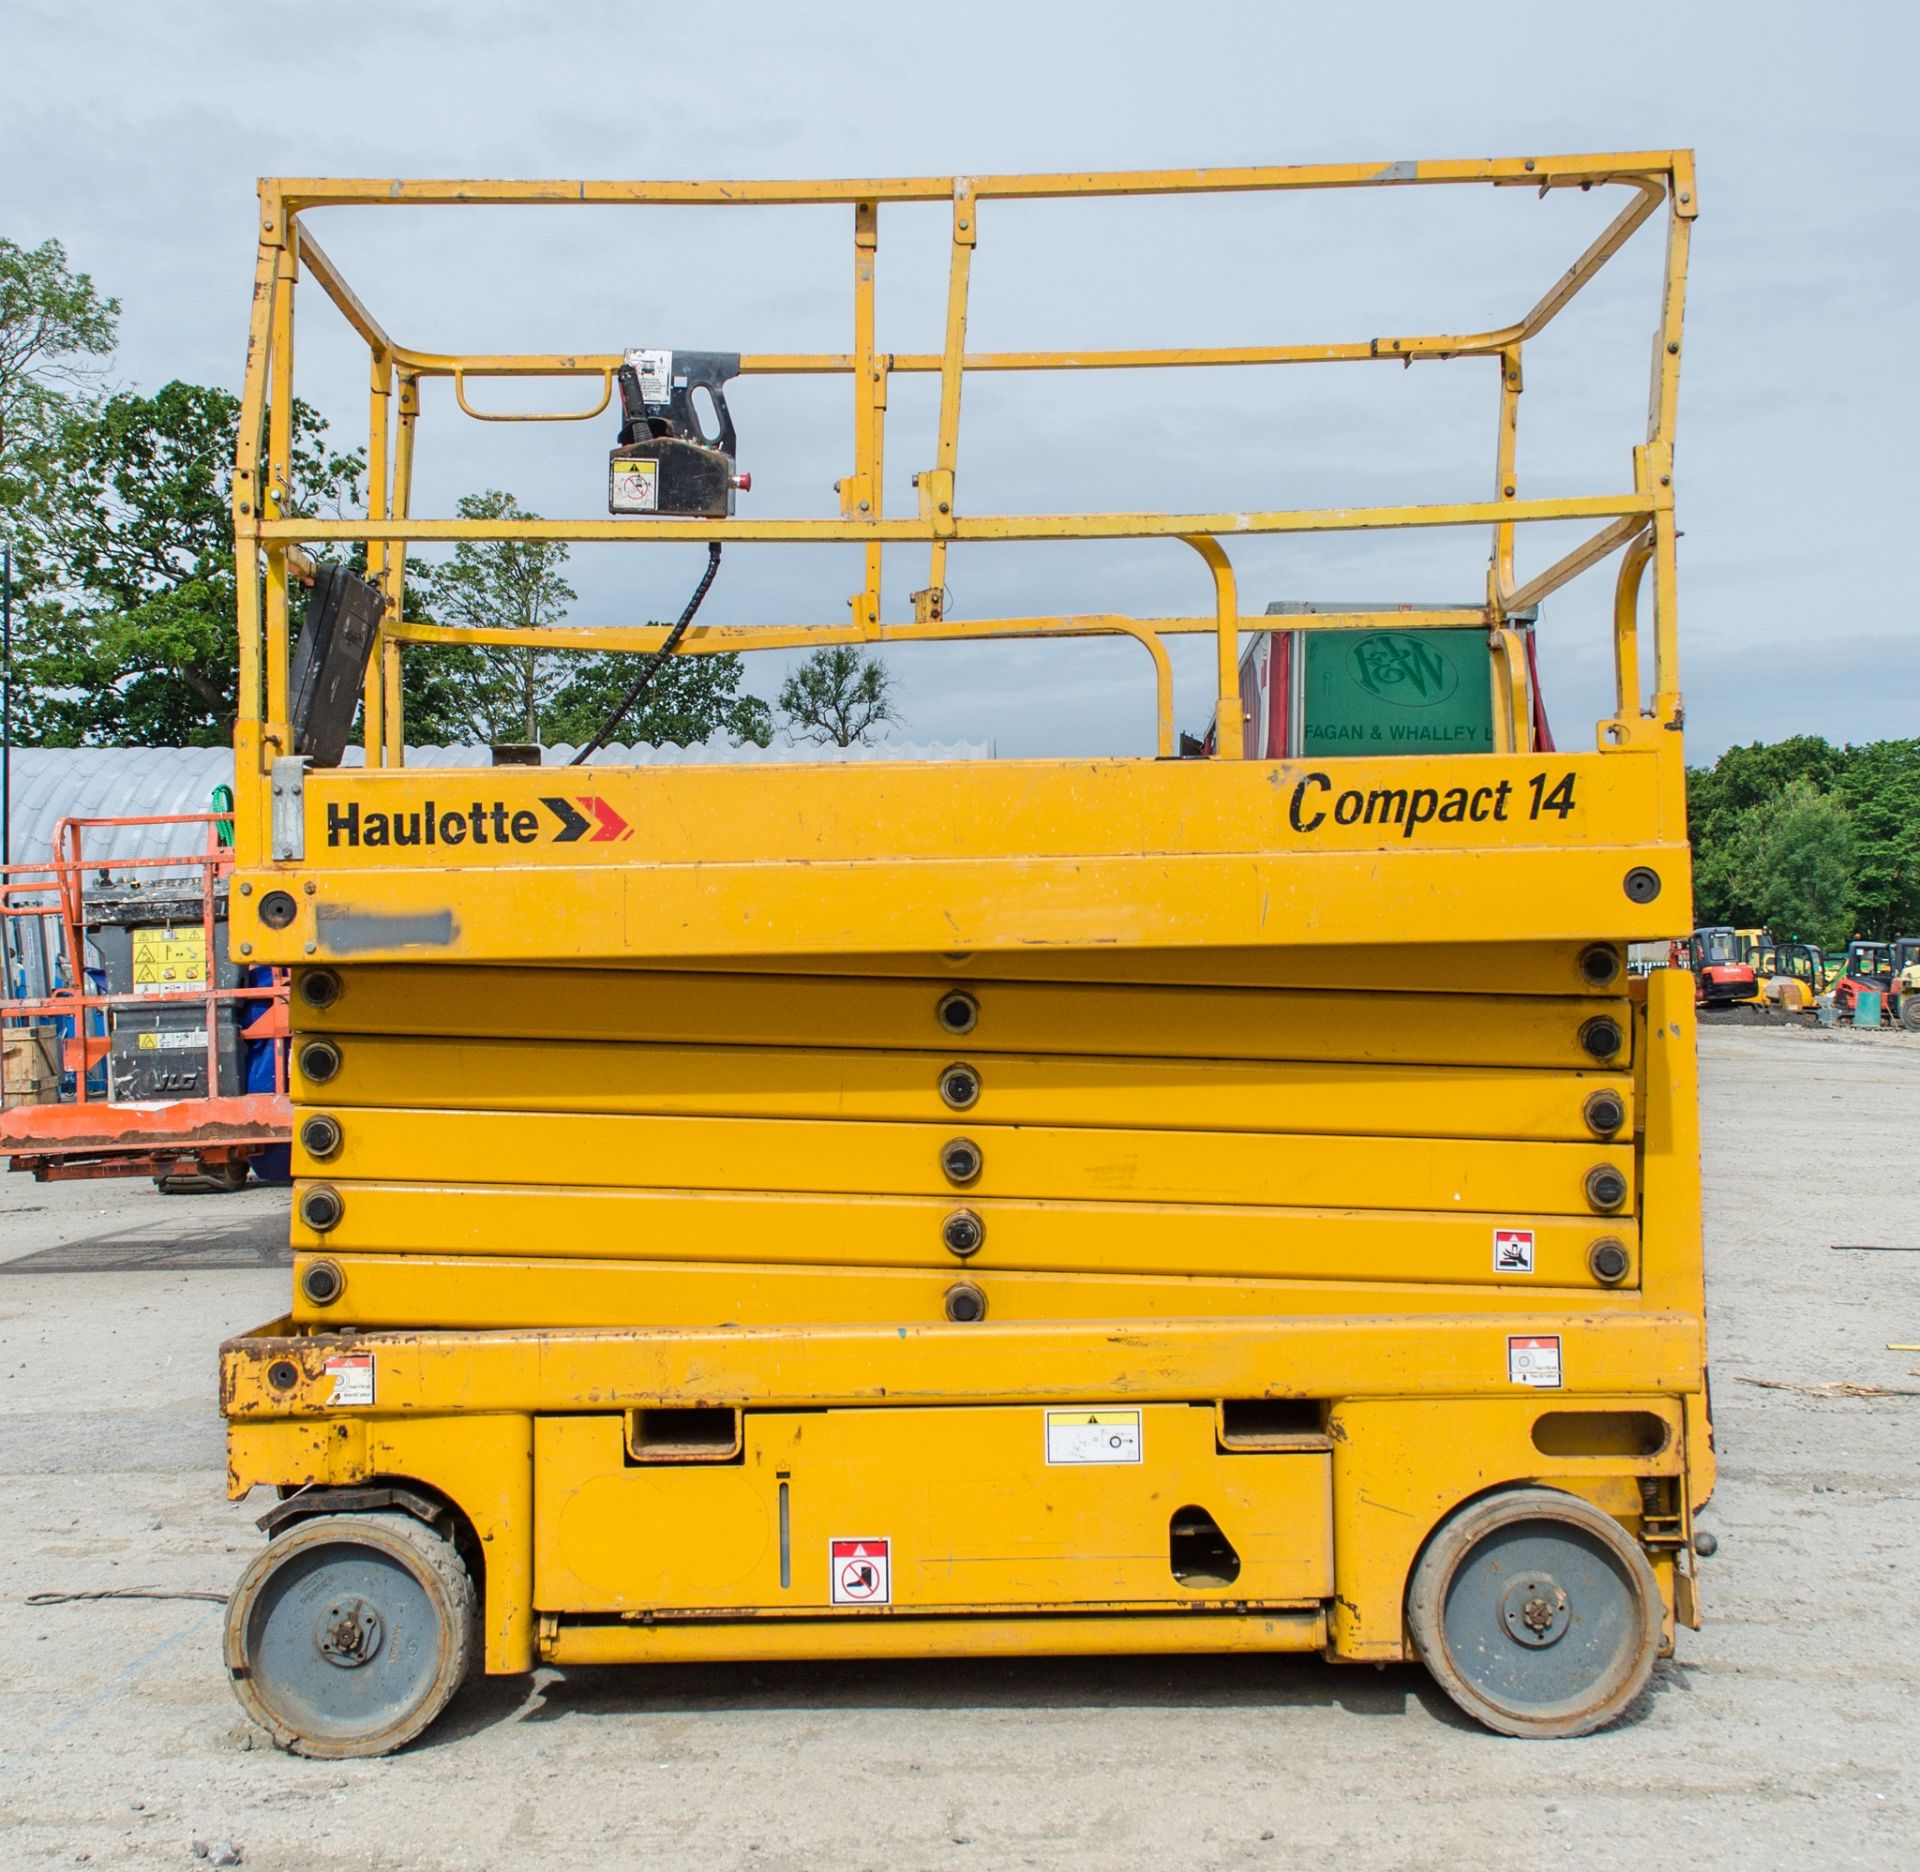 Haulotte Compact 14 battery electric scissor lift Year: 2010 S/N: CE143402 Recorded hours: 481 - Bild 6 aus 10